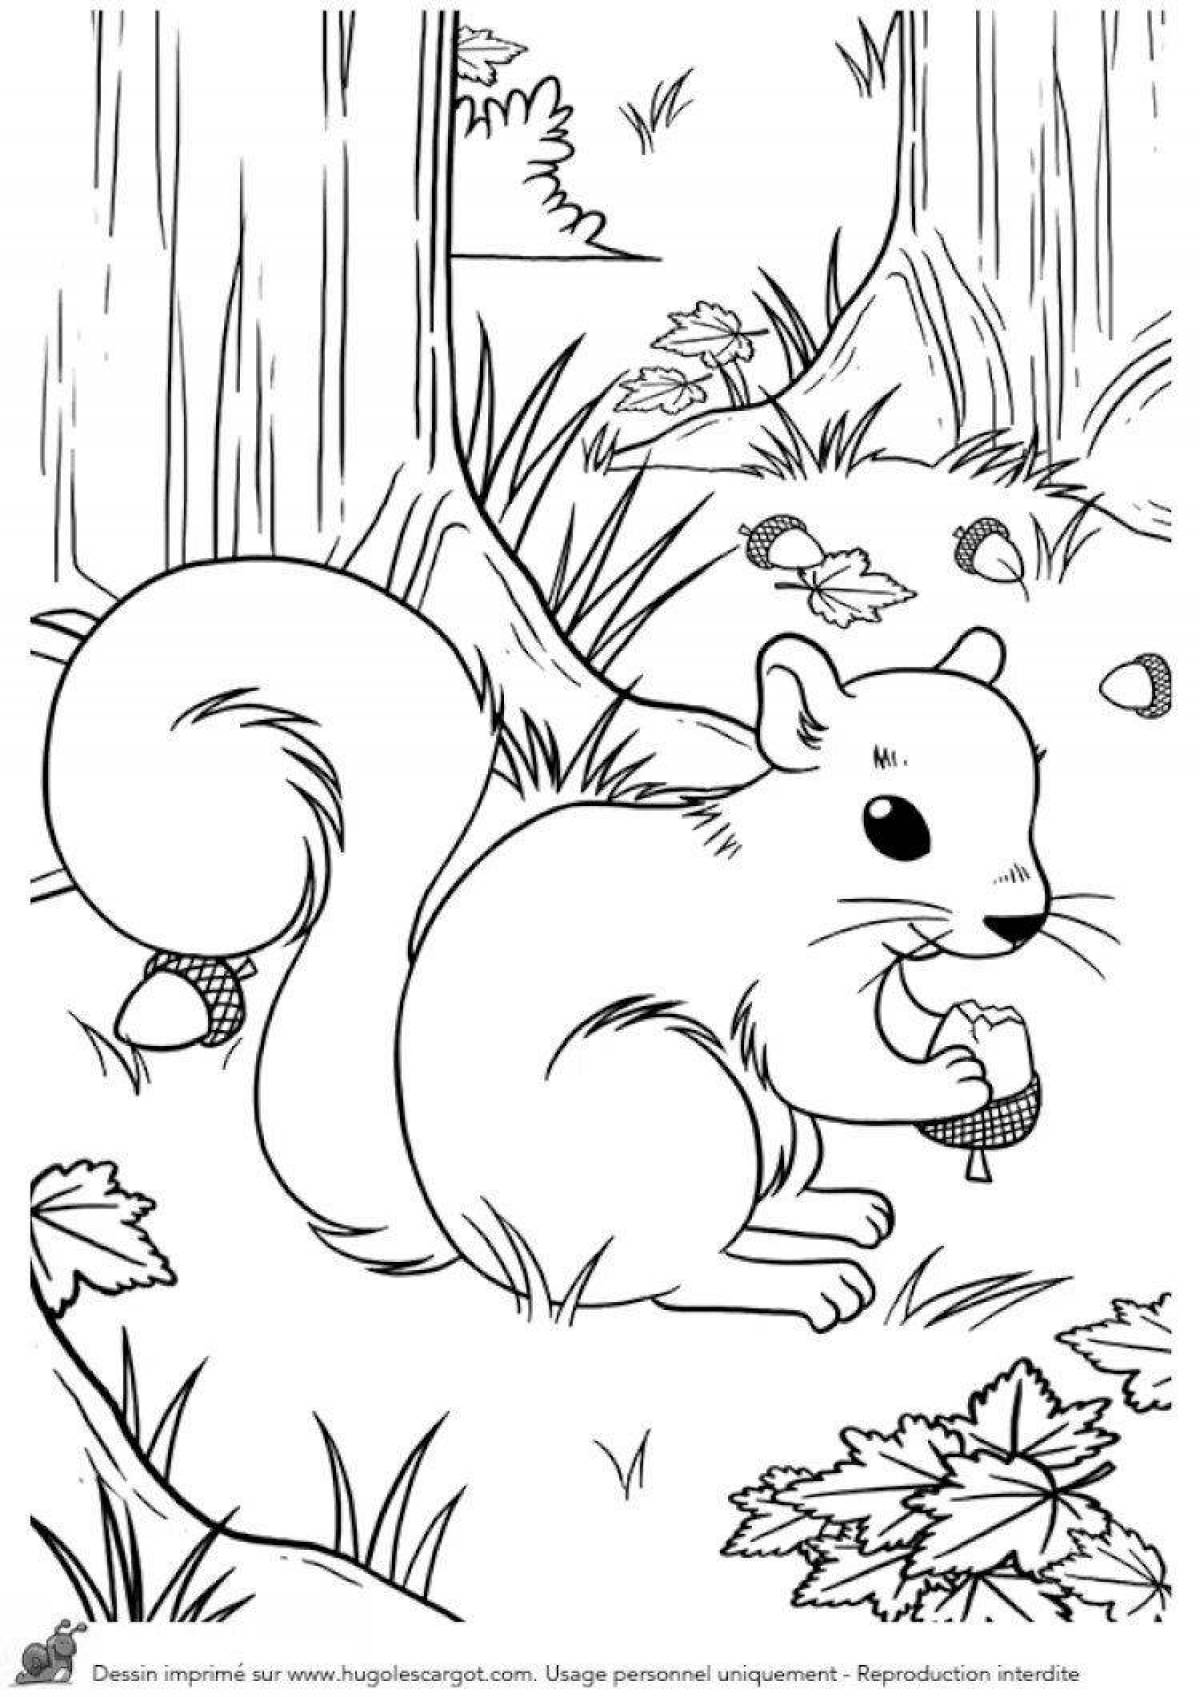 Funny squirrel coloring book for kids 6-7 years old